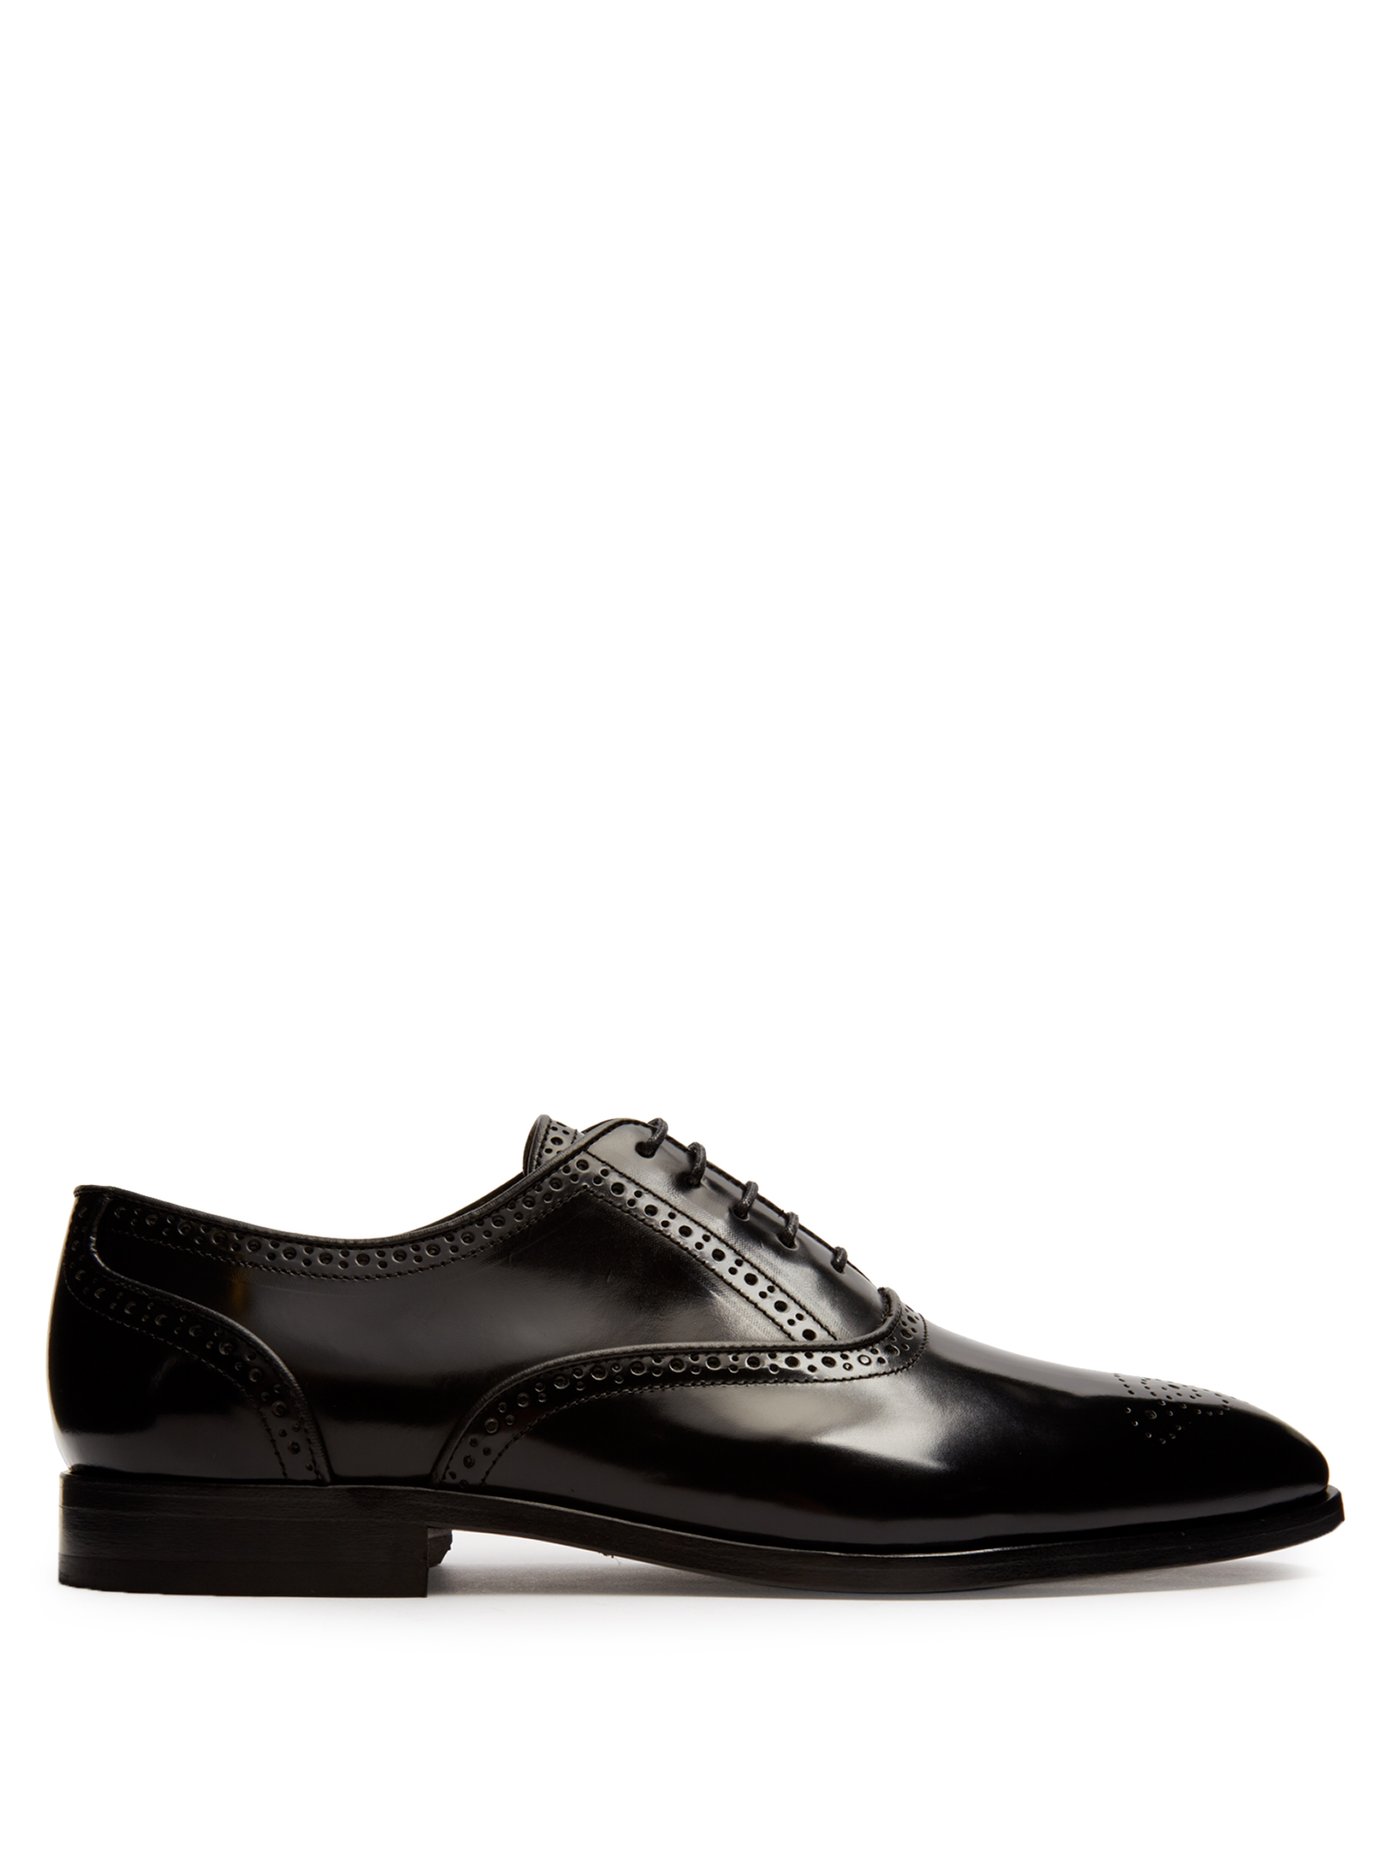 Gould leather derby shoes | Paul Smith 